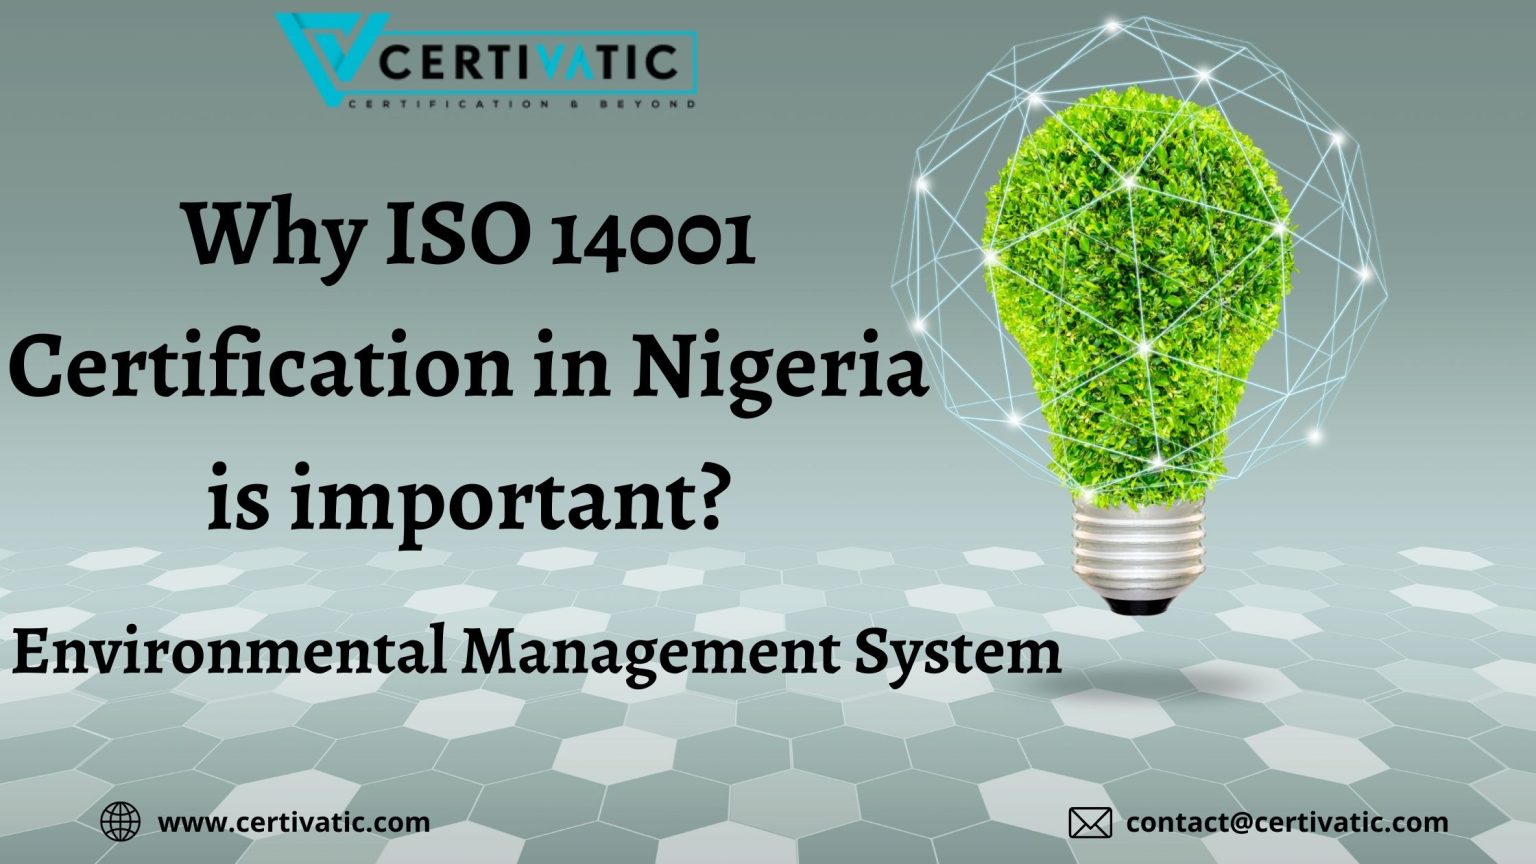 Why ISO 14001 Certification in Nigeria is Important?